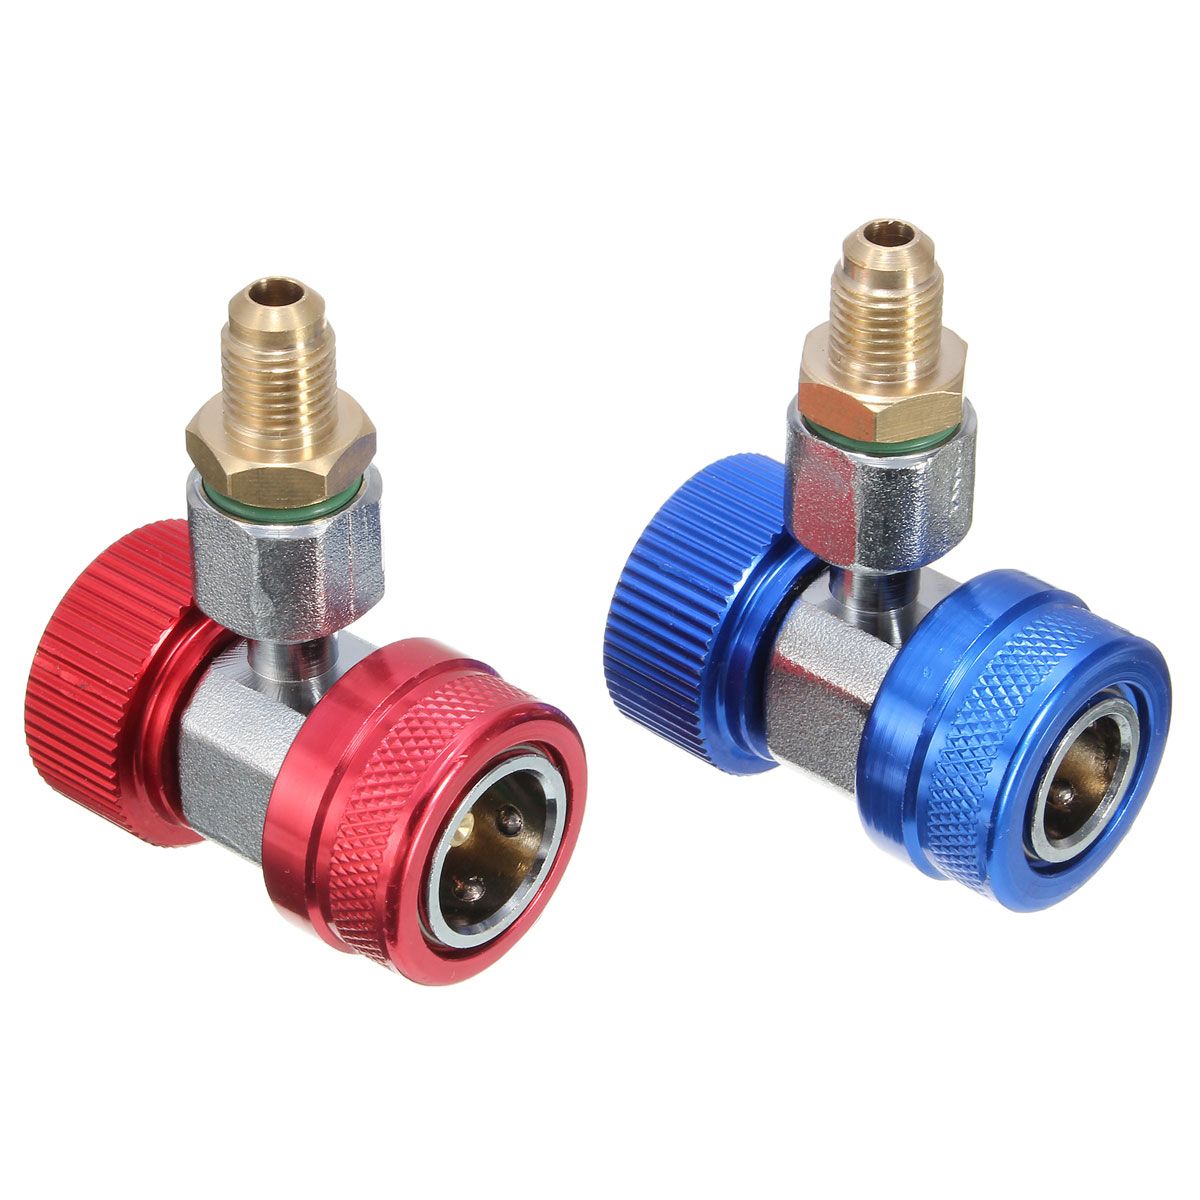 Adapter-R134A-Quick-Coupler-90deg-Low-amp-High-Side-AC-Manifold-Extractor-Valve-Core-1305516